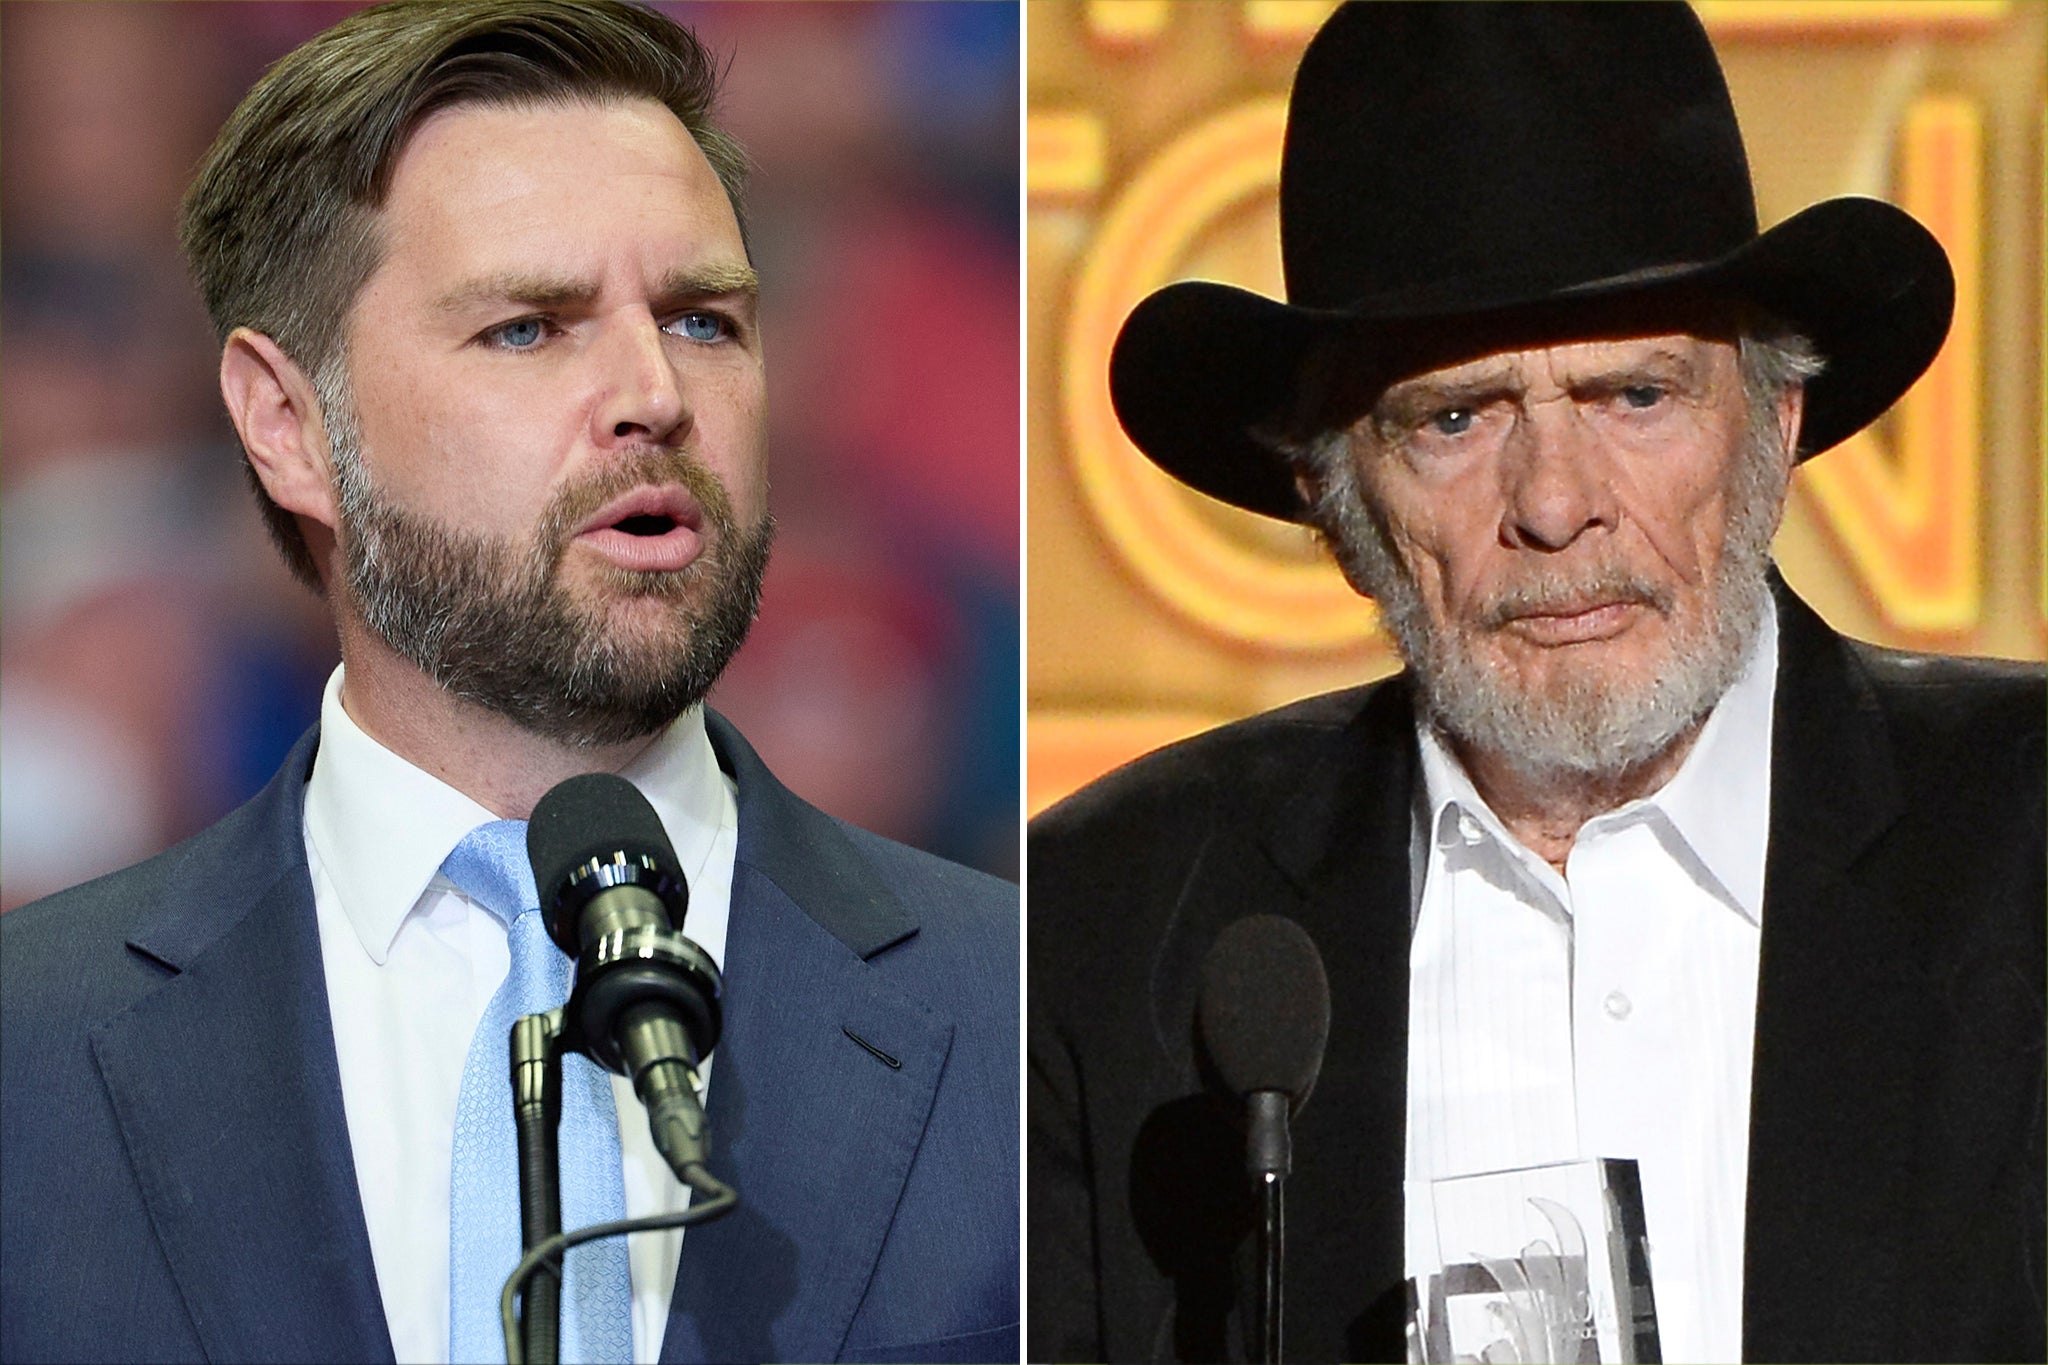 JD Vance's entrance song for Merle Haggard has a strong anti-war message